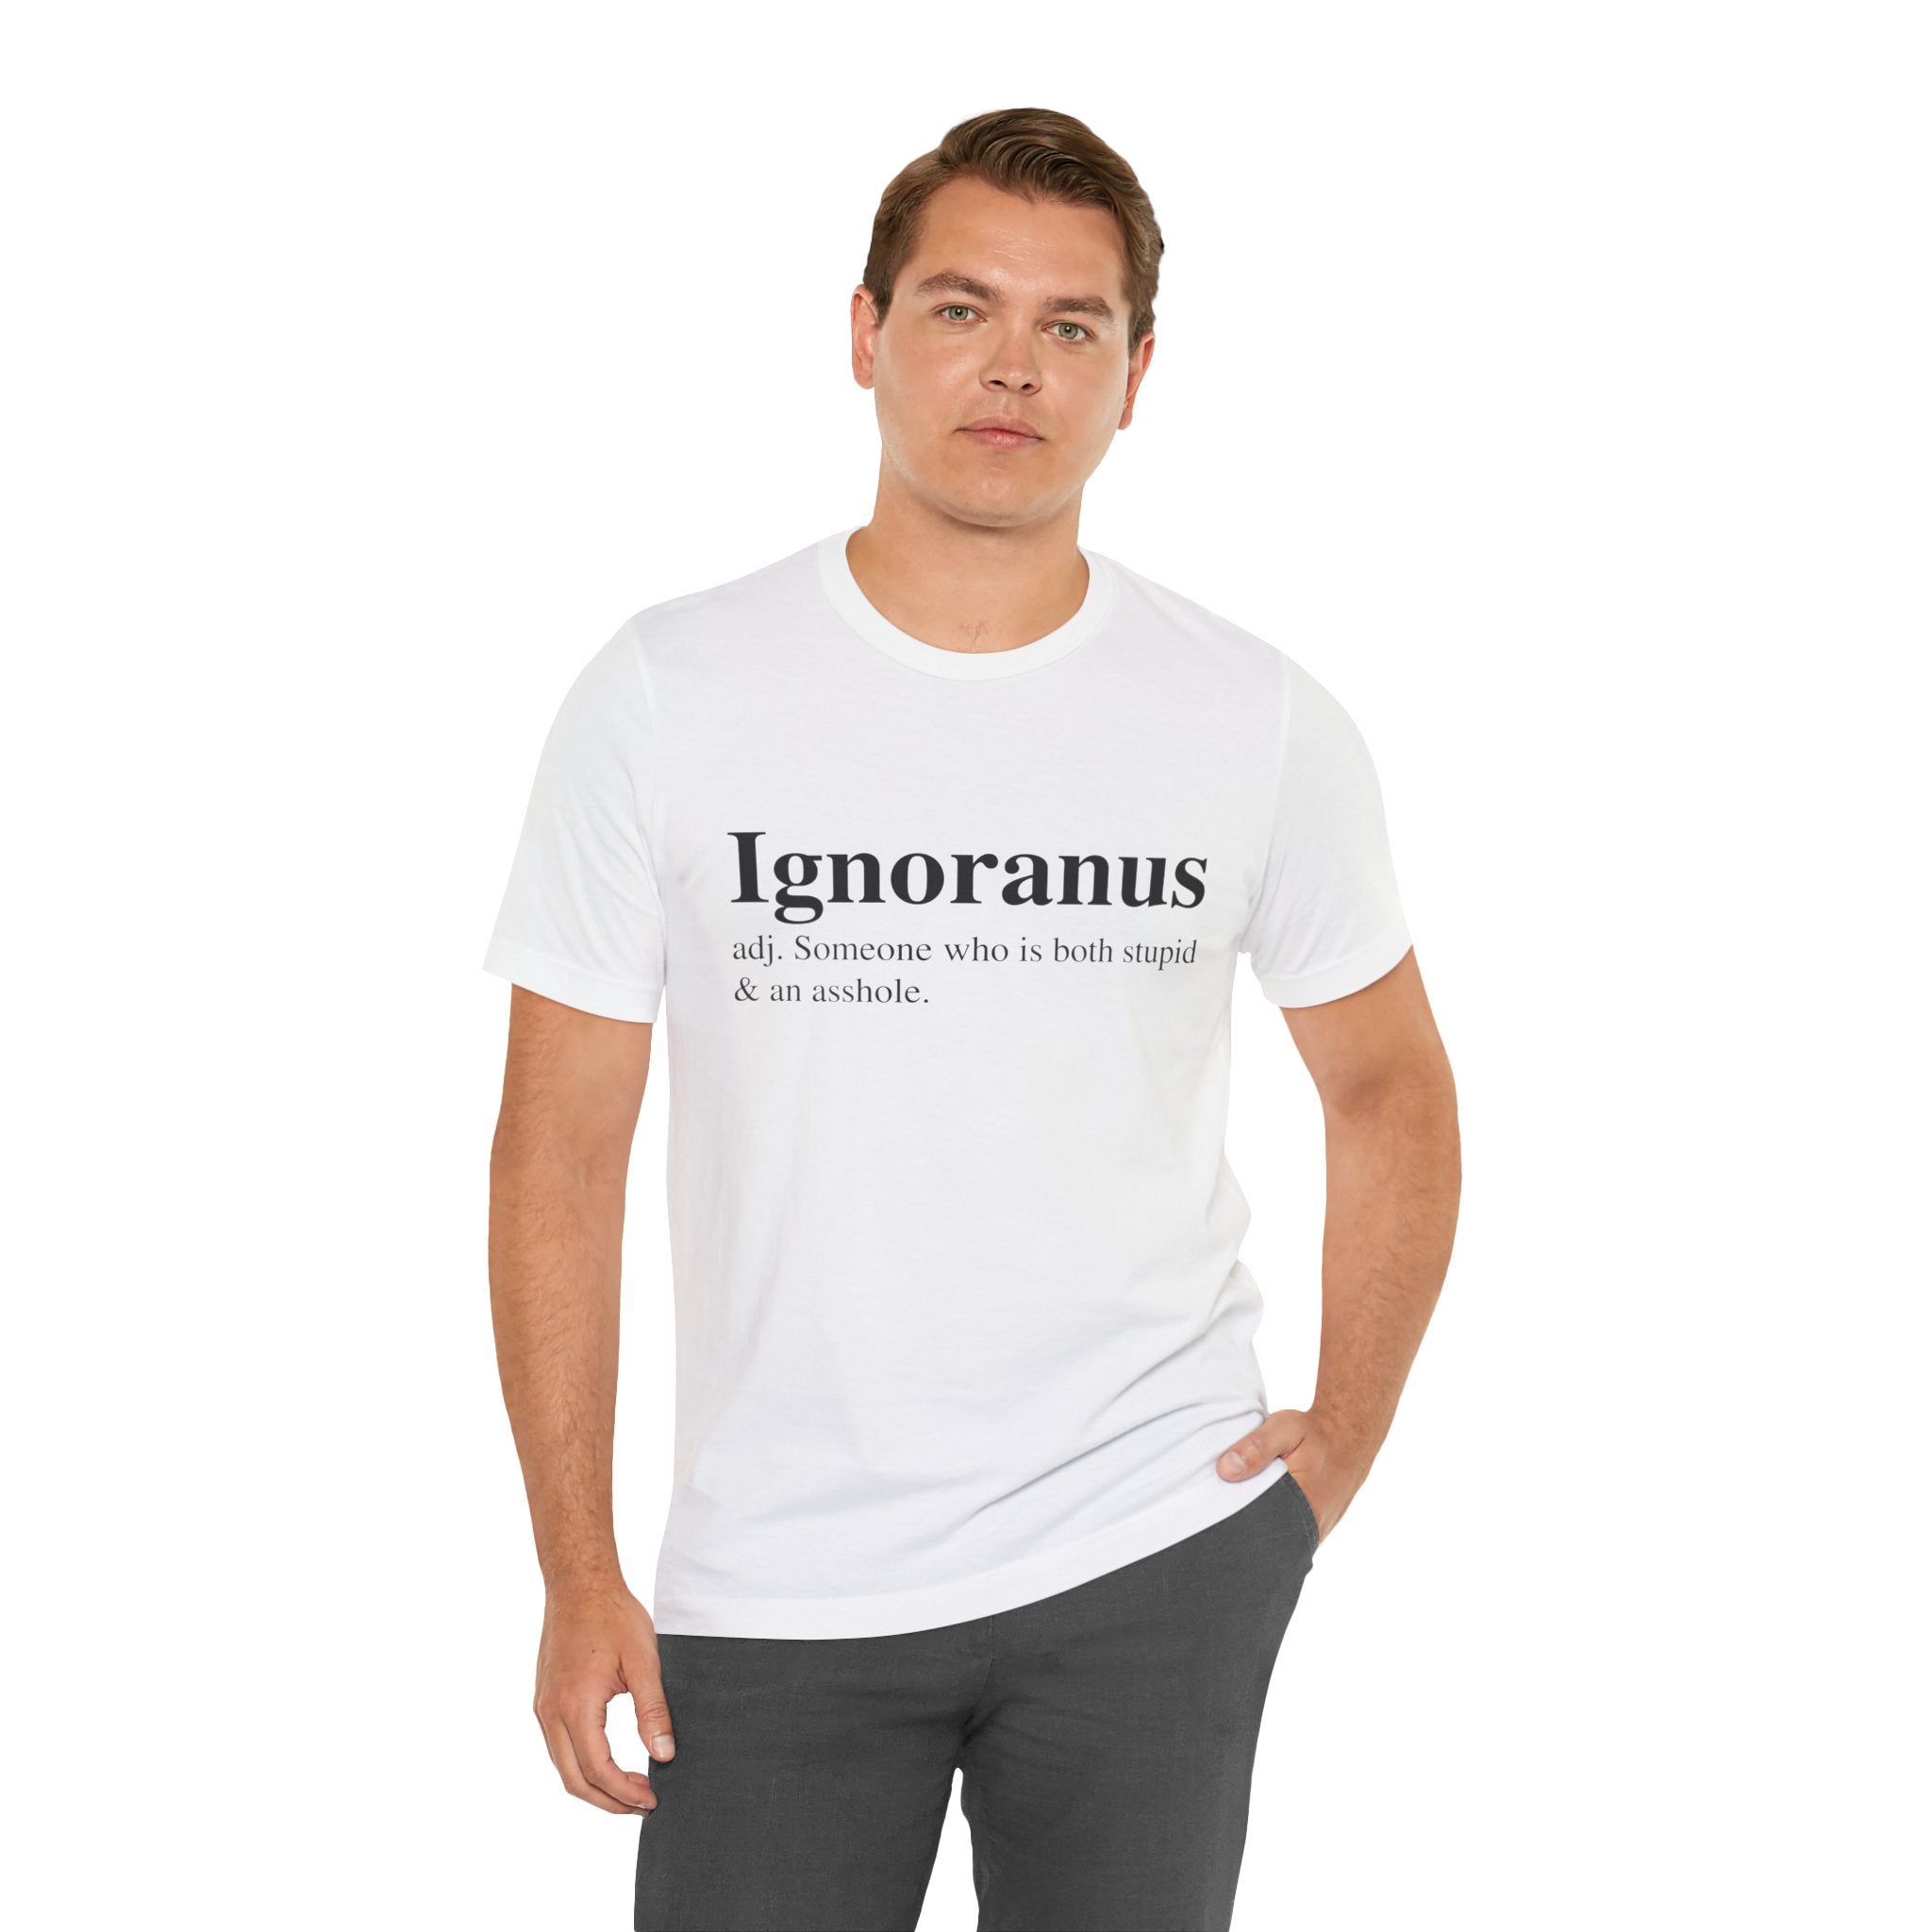 Man in a soft cotton Ignoranus T-Shirt with the word "ignoranus" and its humorous definition printed on the front, standing against a white background.